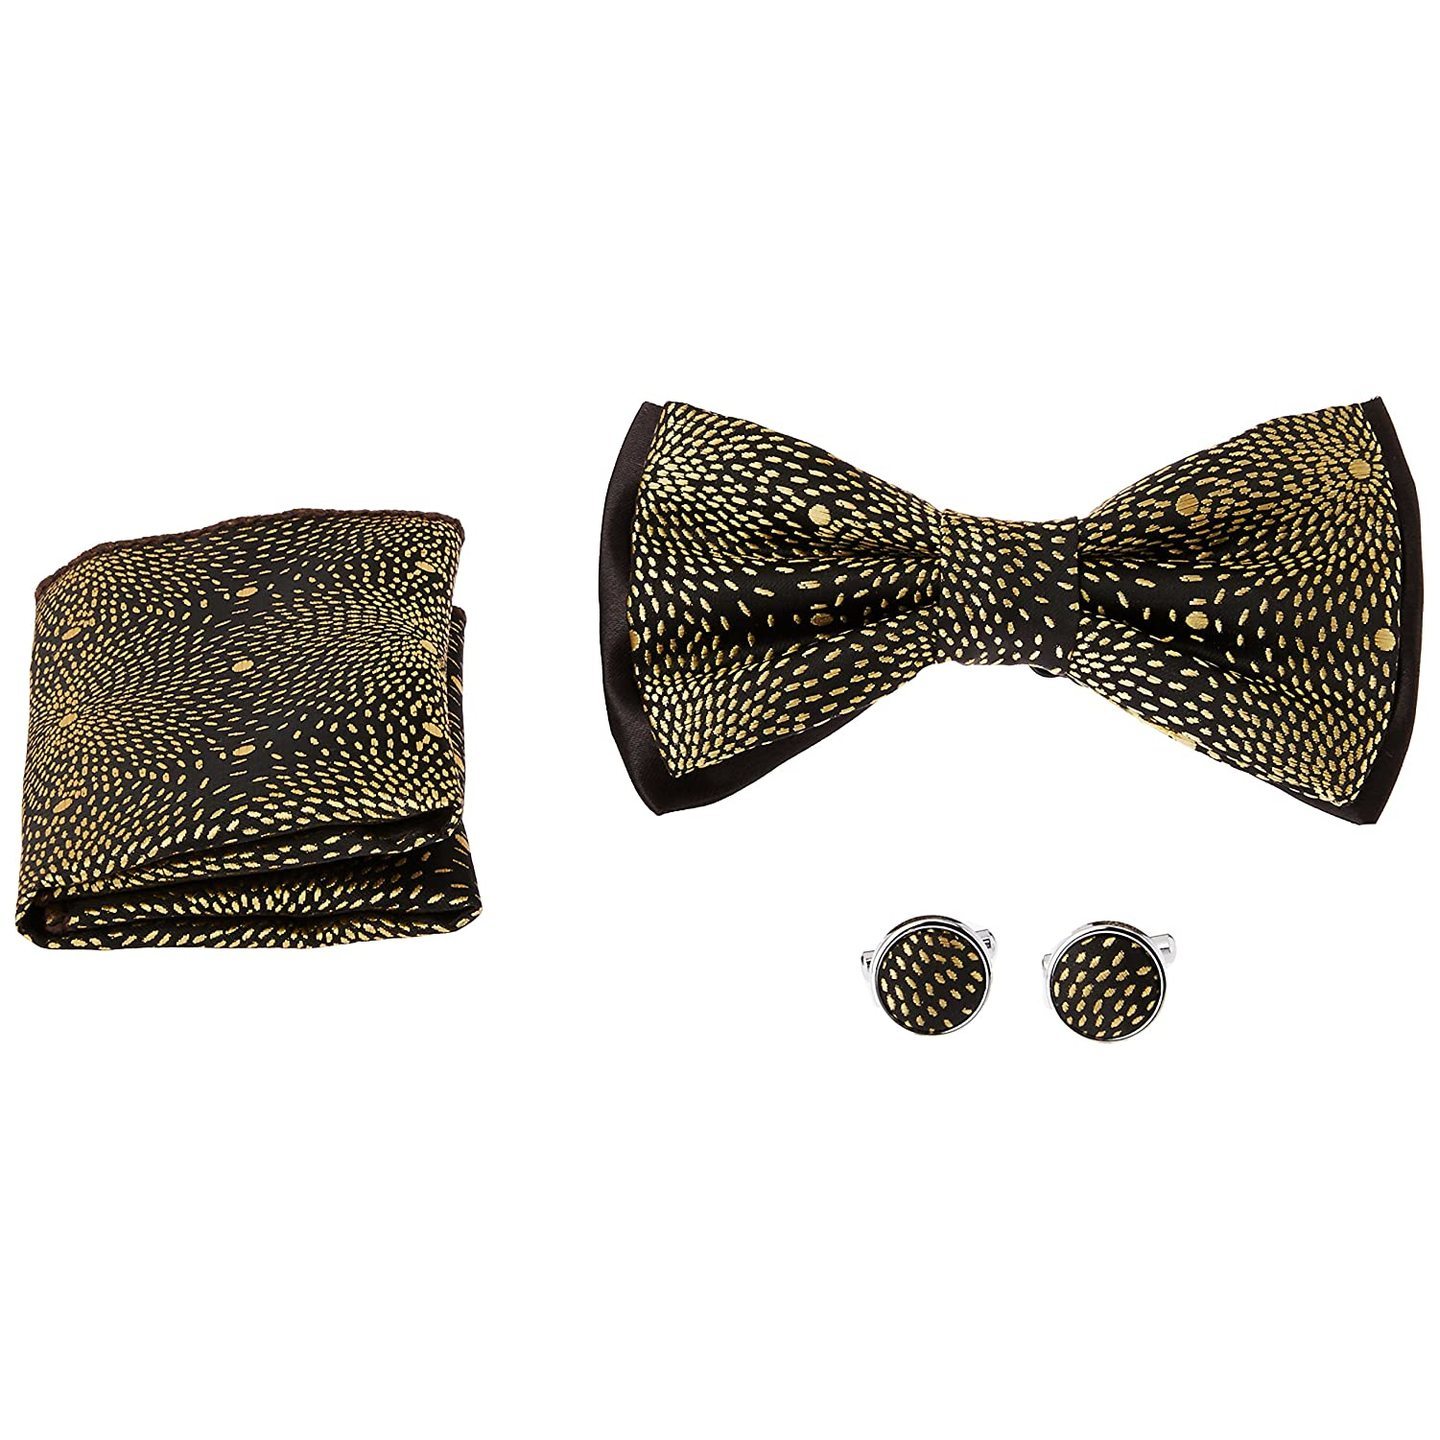 Men's Bowtie, Cufflink and Pocket Square Combo